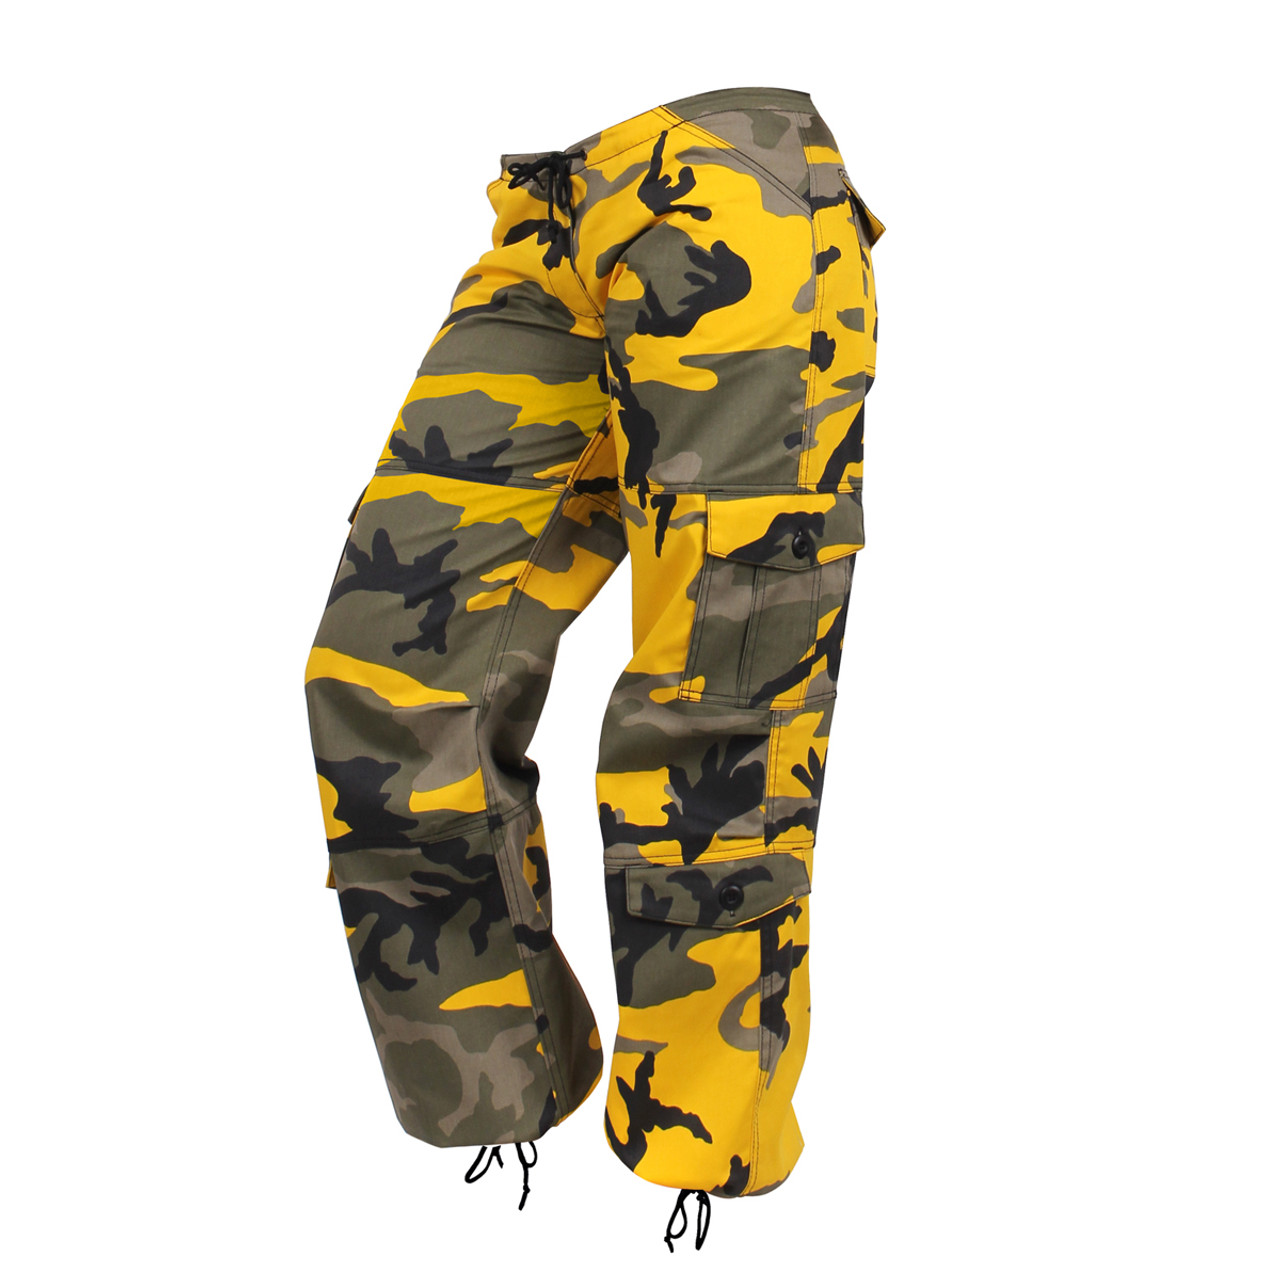 TRENDY ARMY STYLE JOGGER CARGO PANTS FOR WOMEN